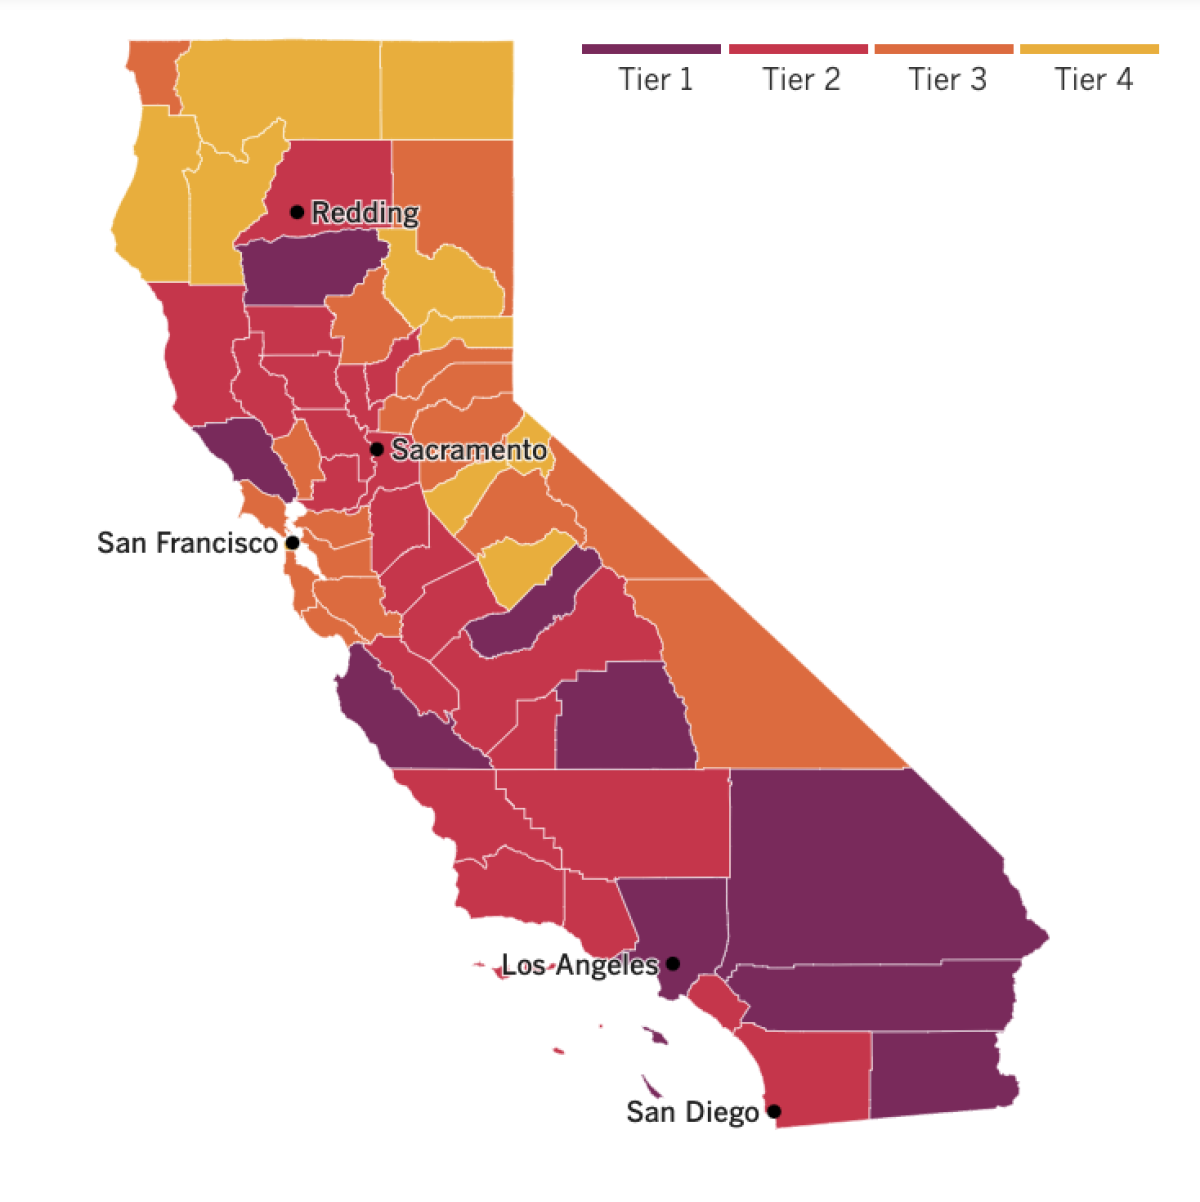 A map showing the tiers to which California counties have been assigned for reopening based on local coronavirus risk.